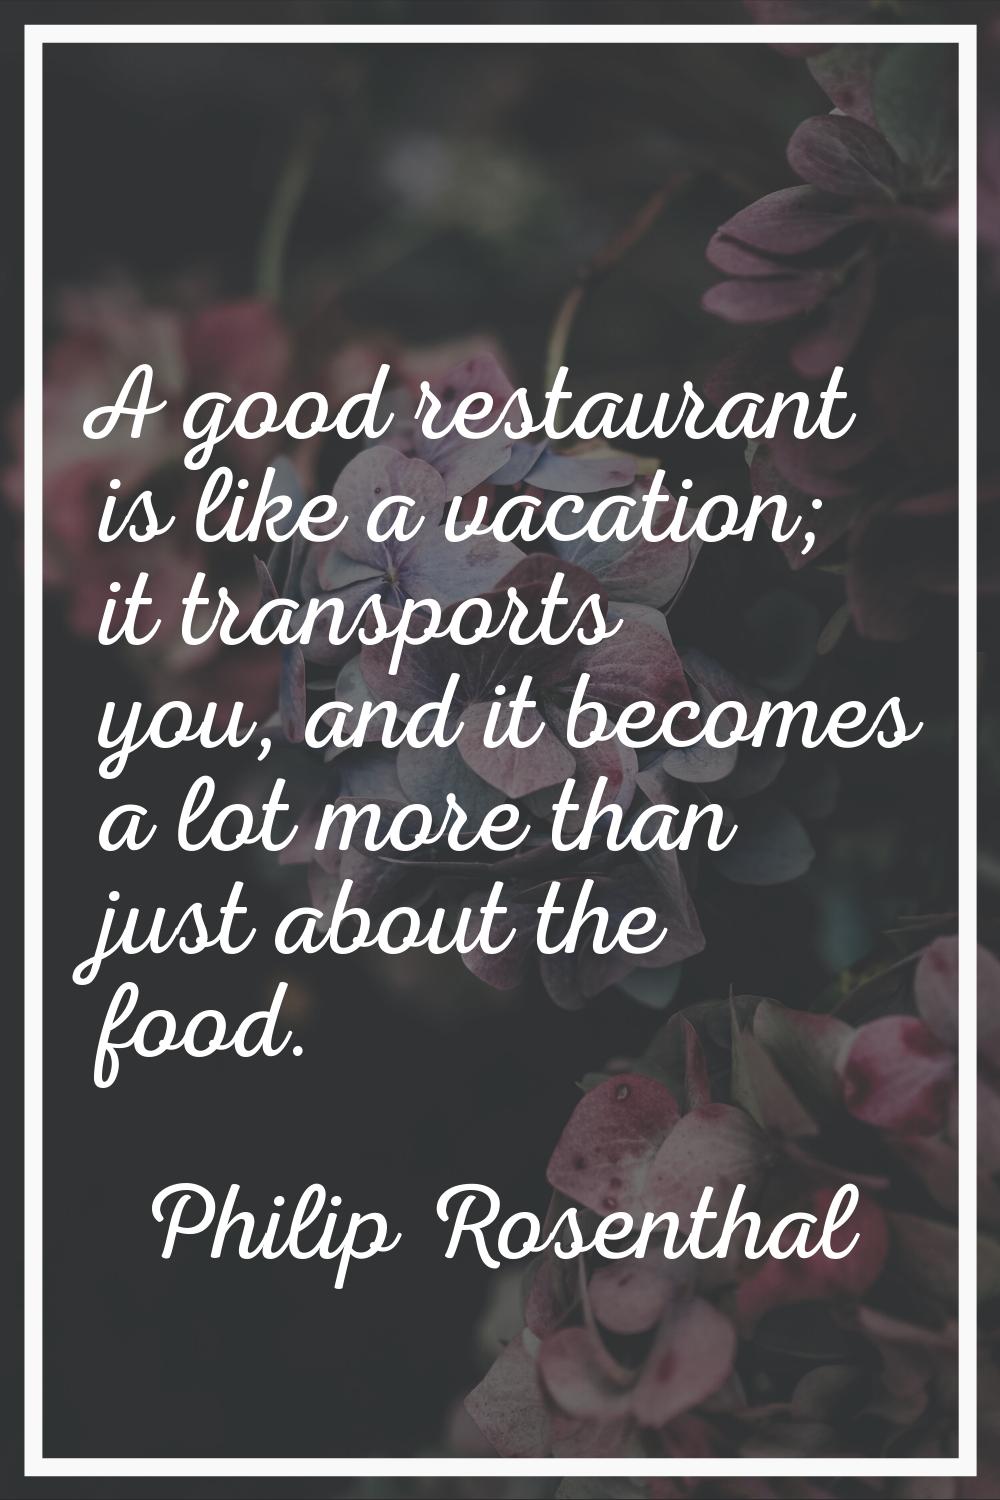 A good restaurant is like a vacation; it transports you, and it becomes a lot more than just about 